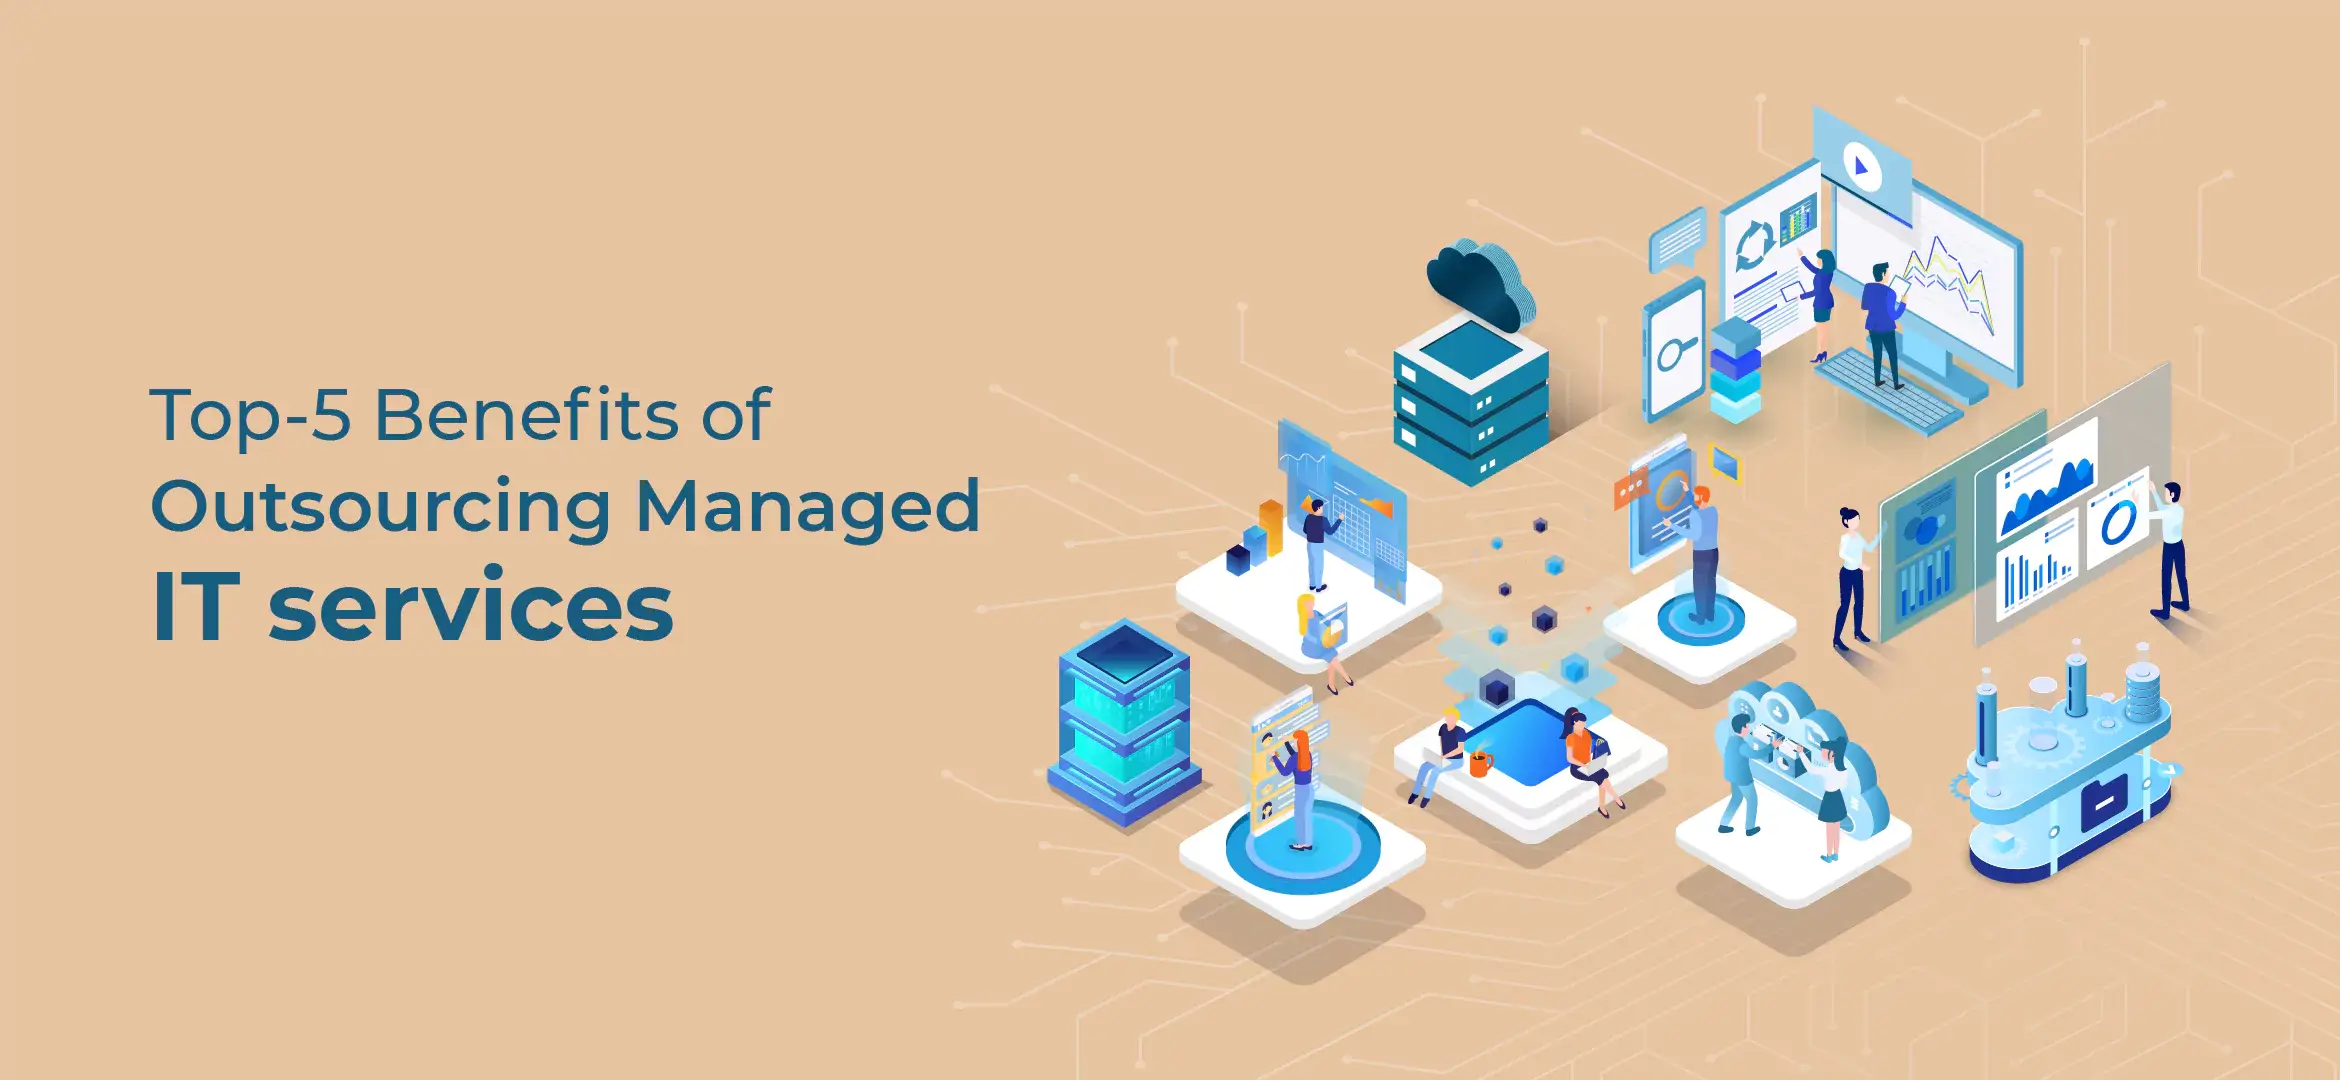 Top-5 Benefits of Outsourcing Managed IT services